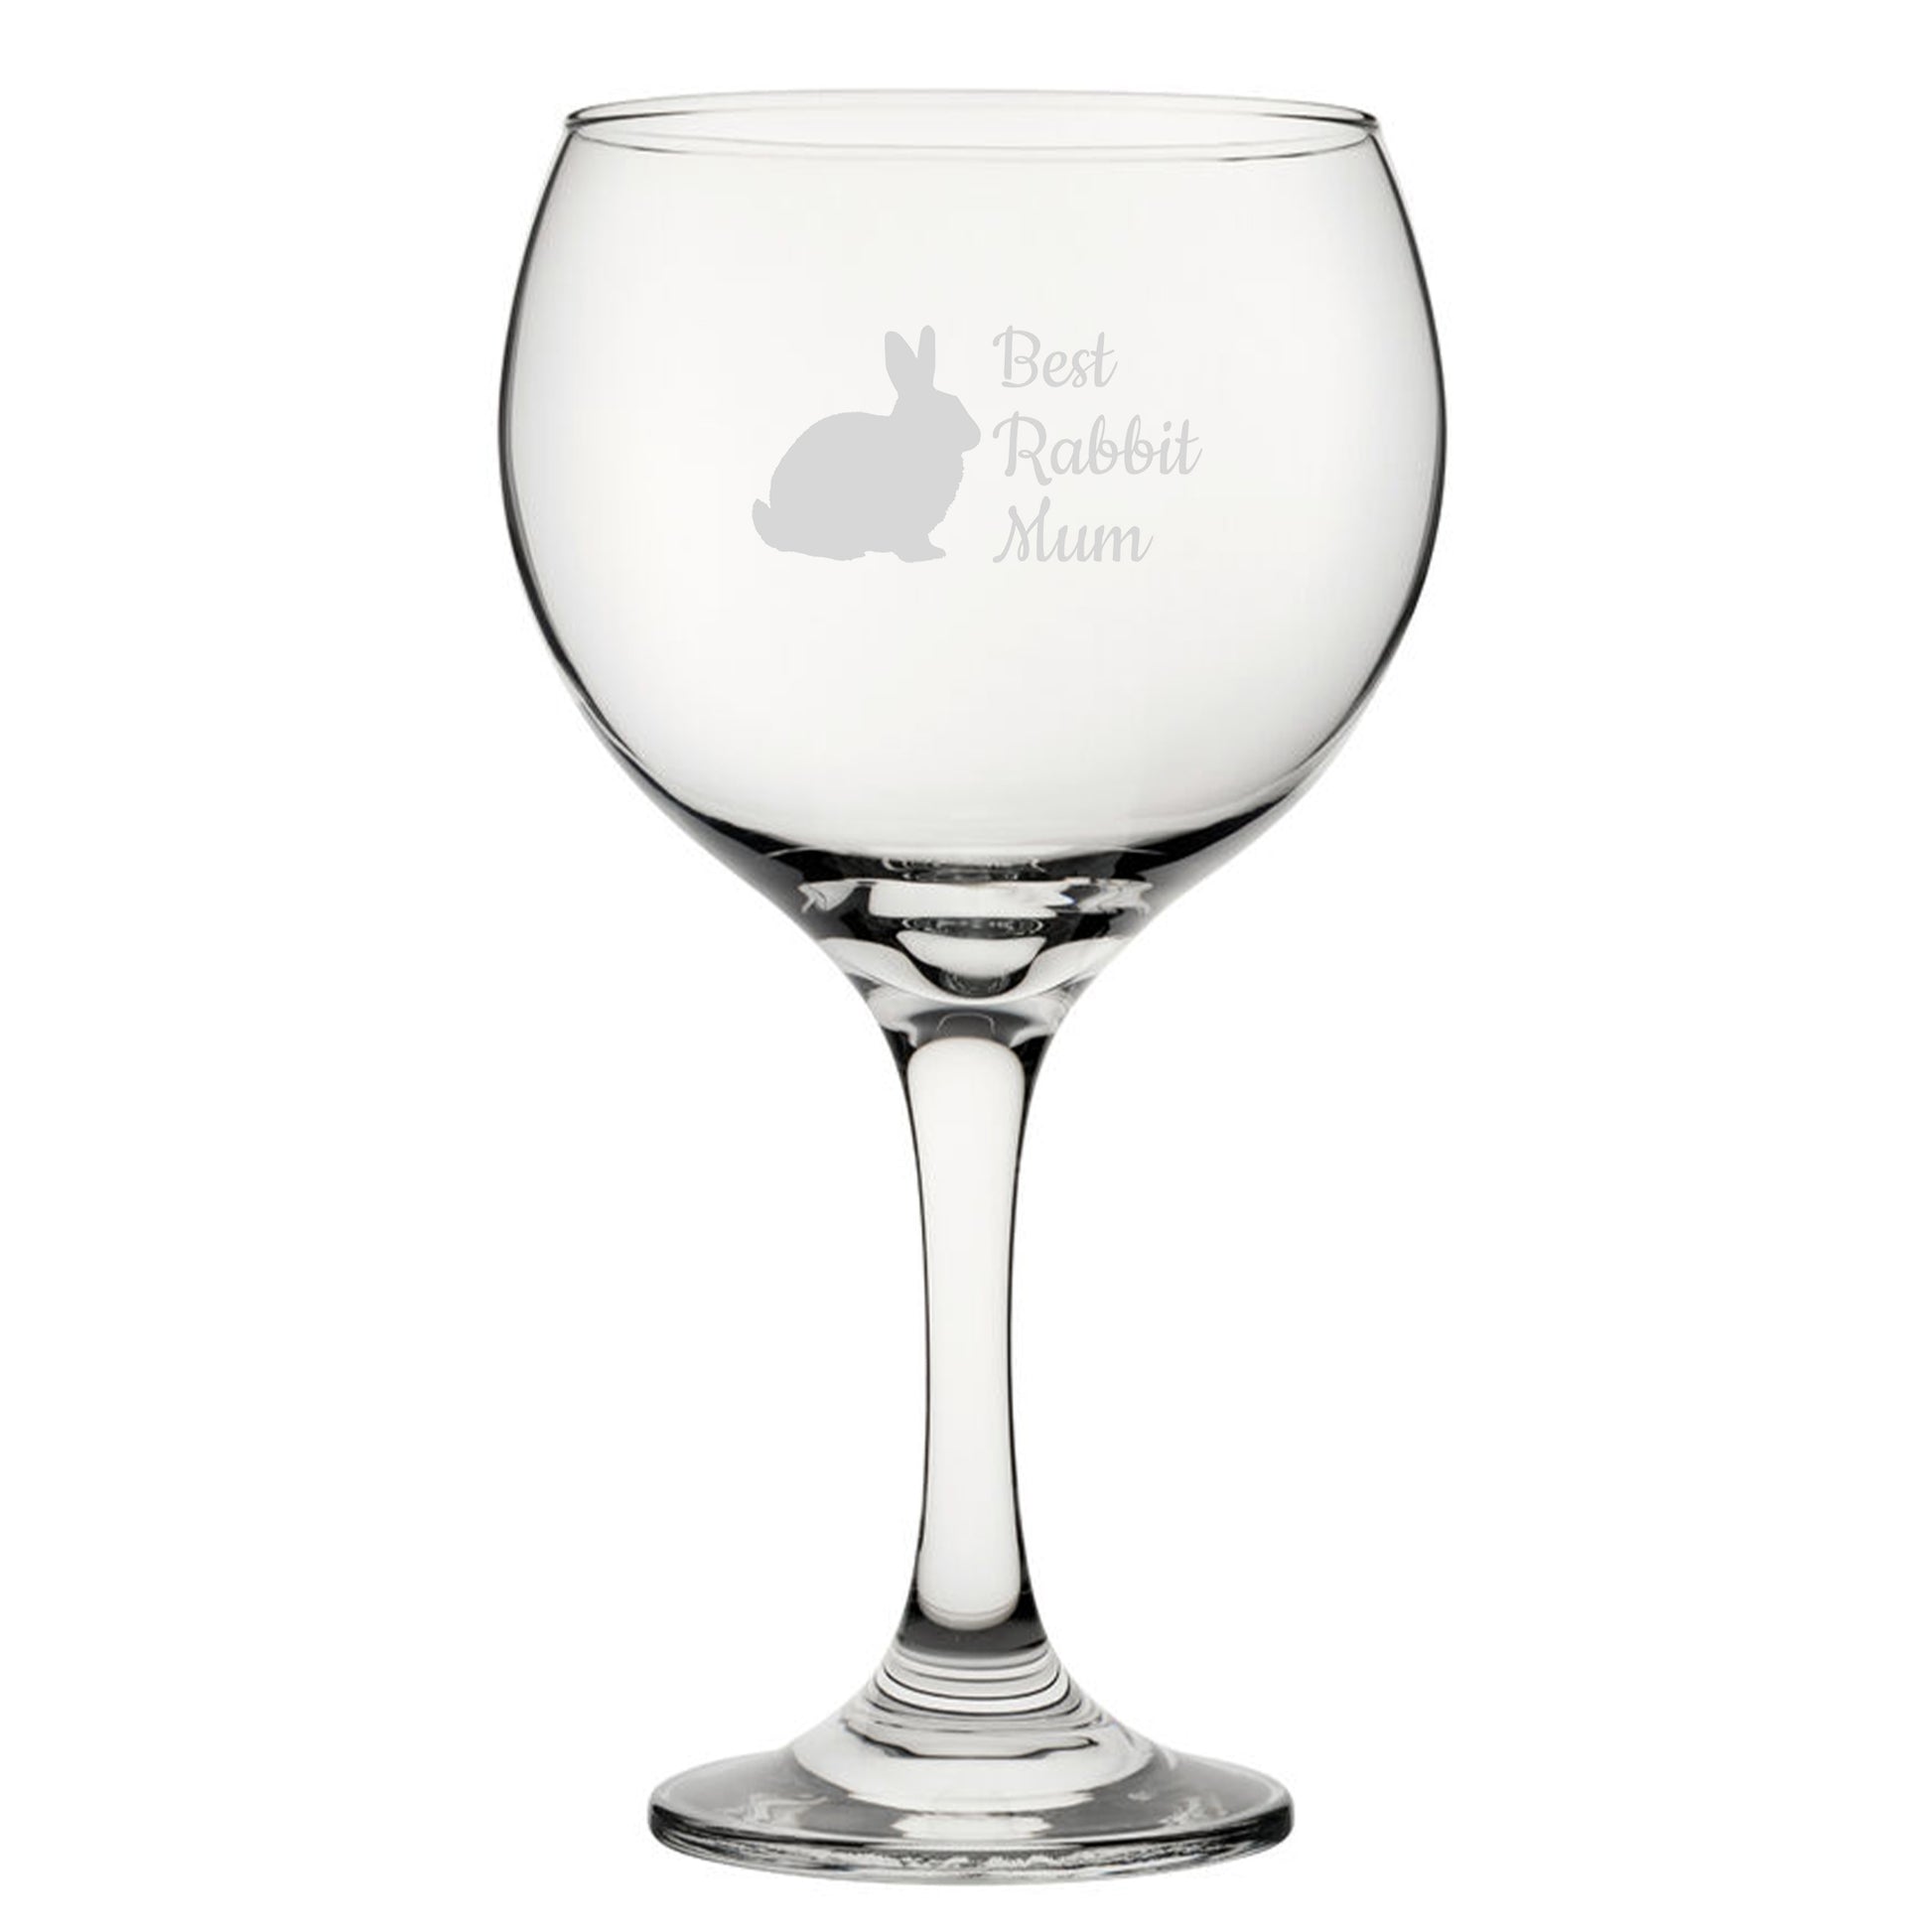 Best Rabbit Dad - Engraved Novelty Gin Balloon Cocktail Glass Image 2